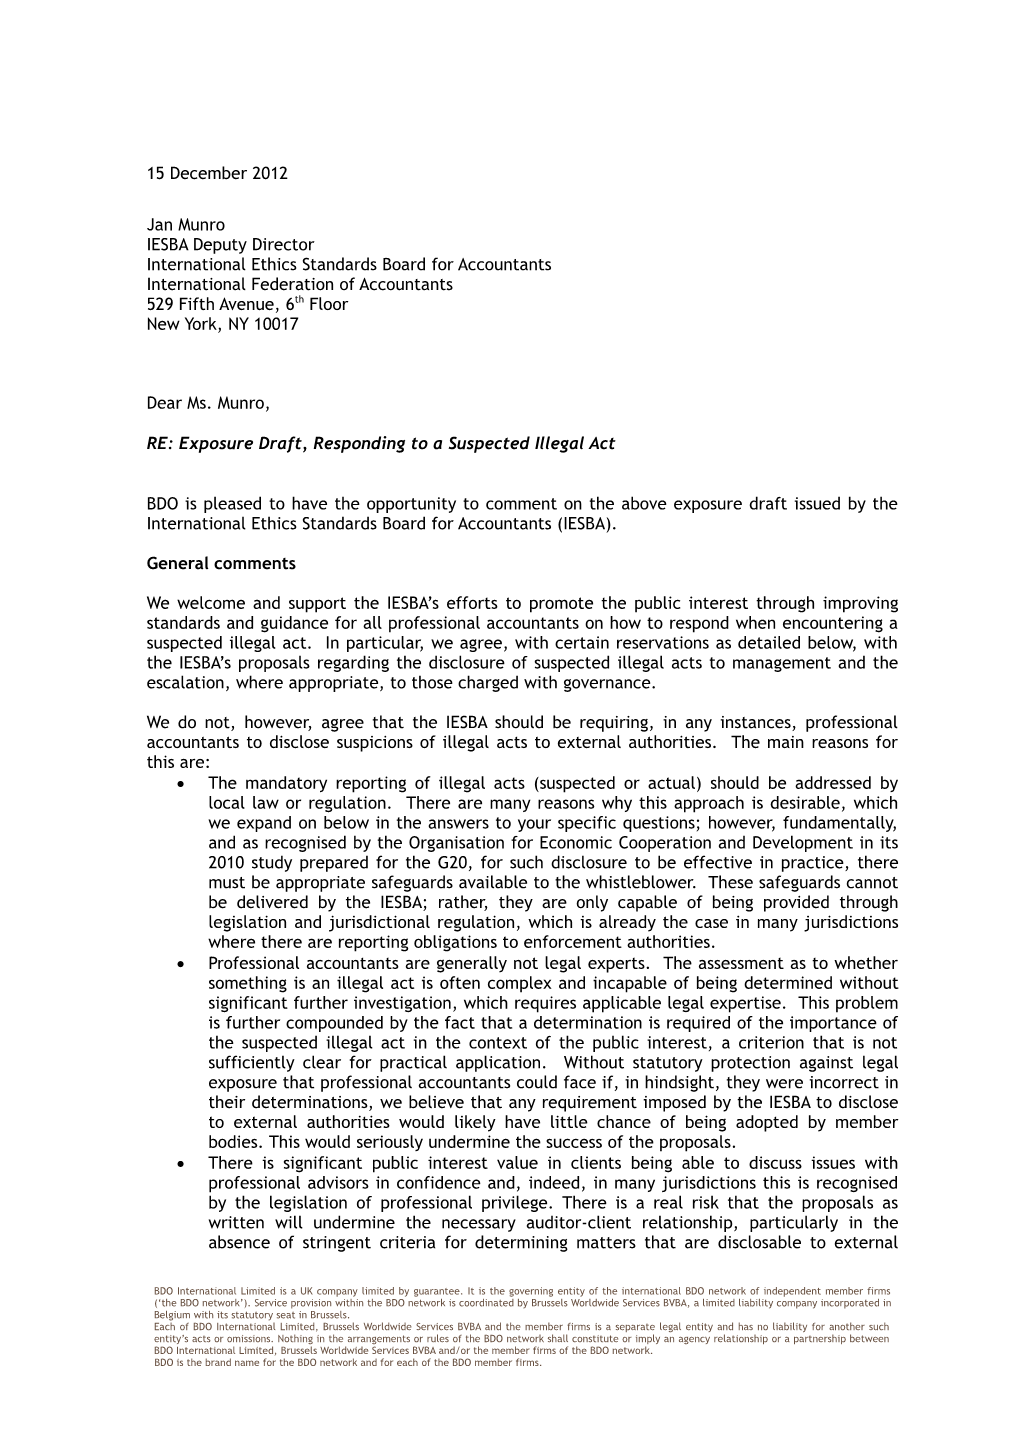 Letter to Ken Siong of IESBA